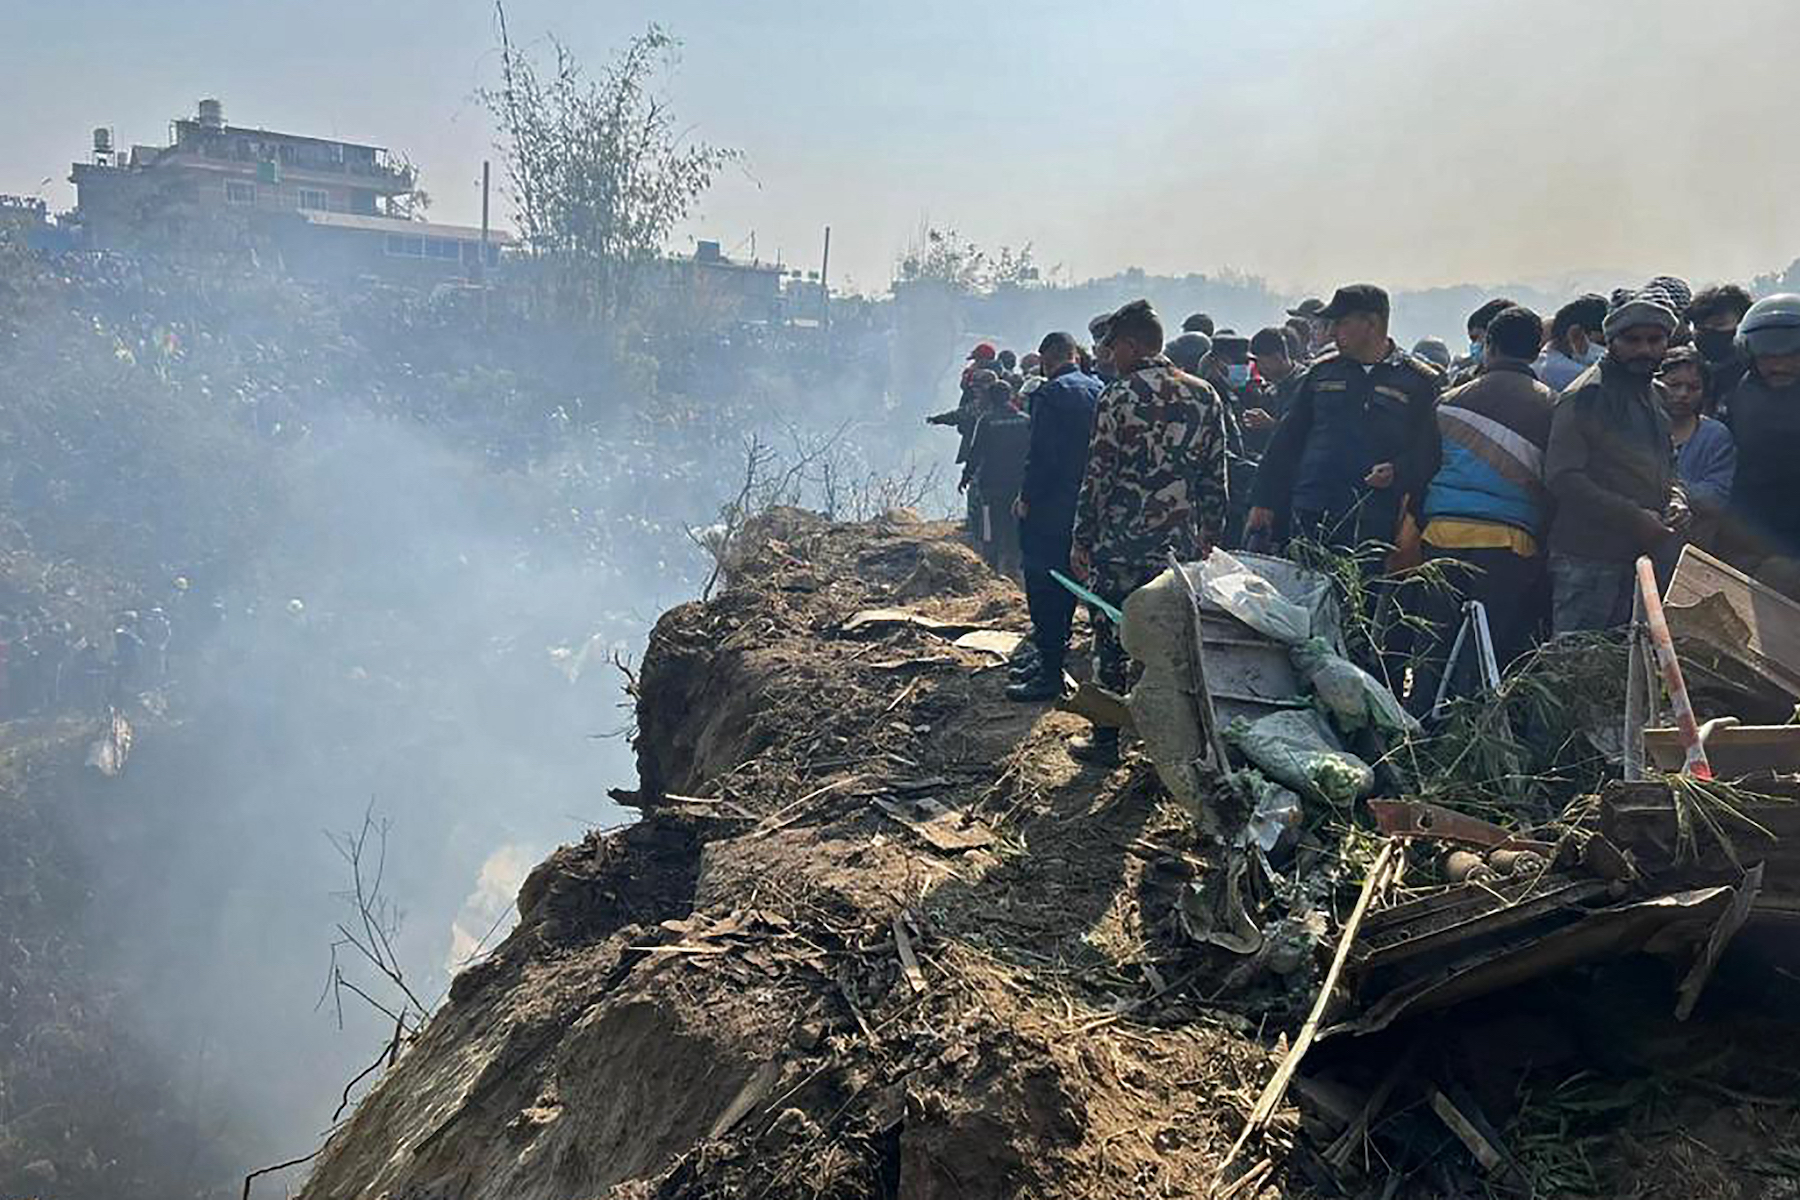 nepal plane crash site people surrounded 2023 yeti airlines